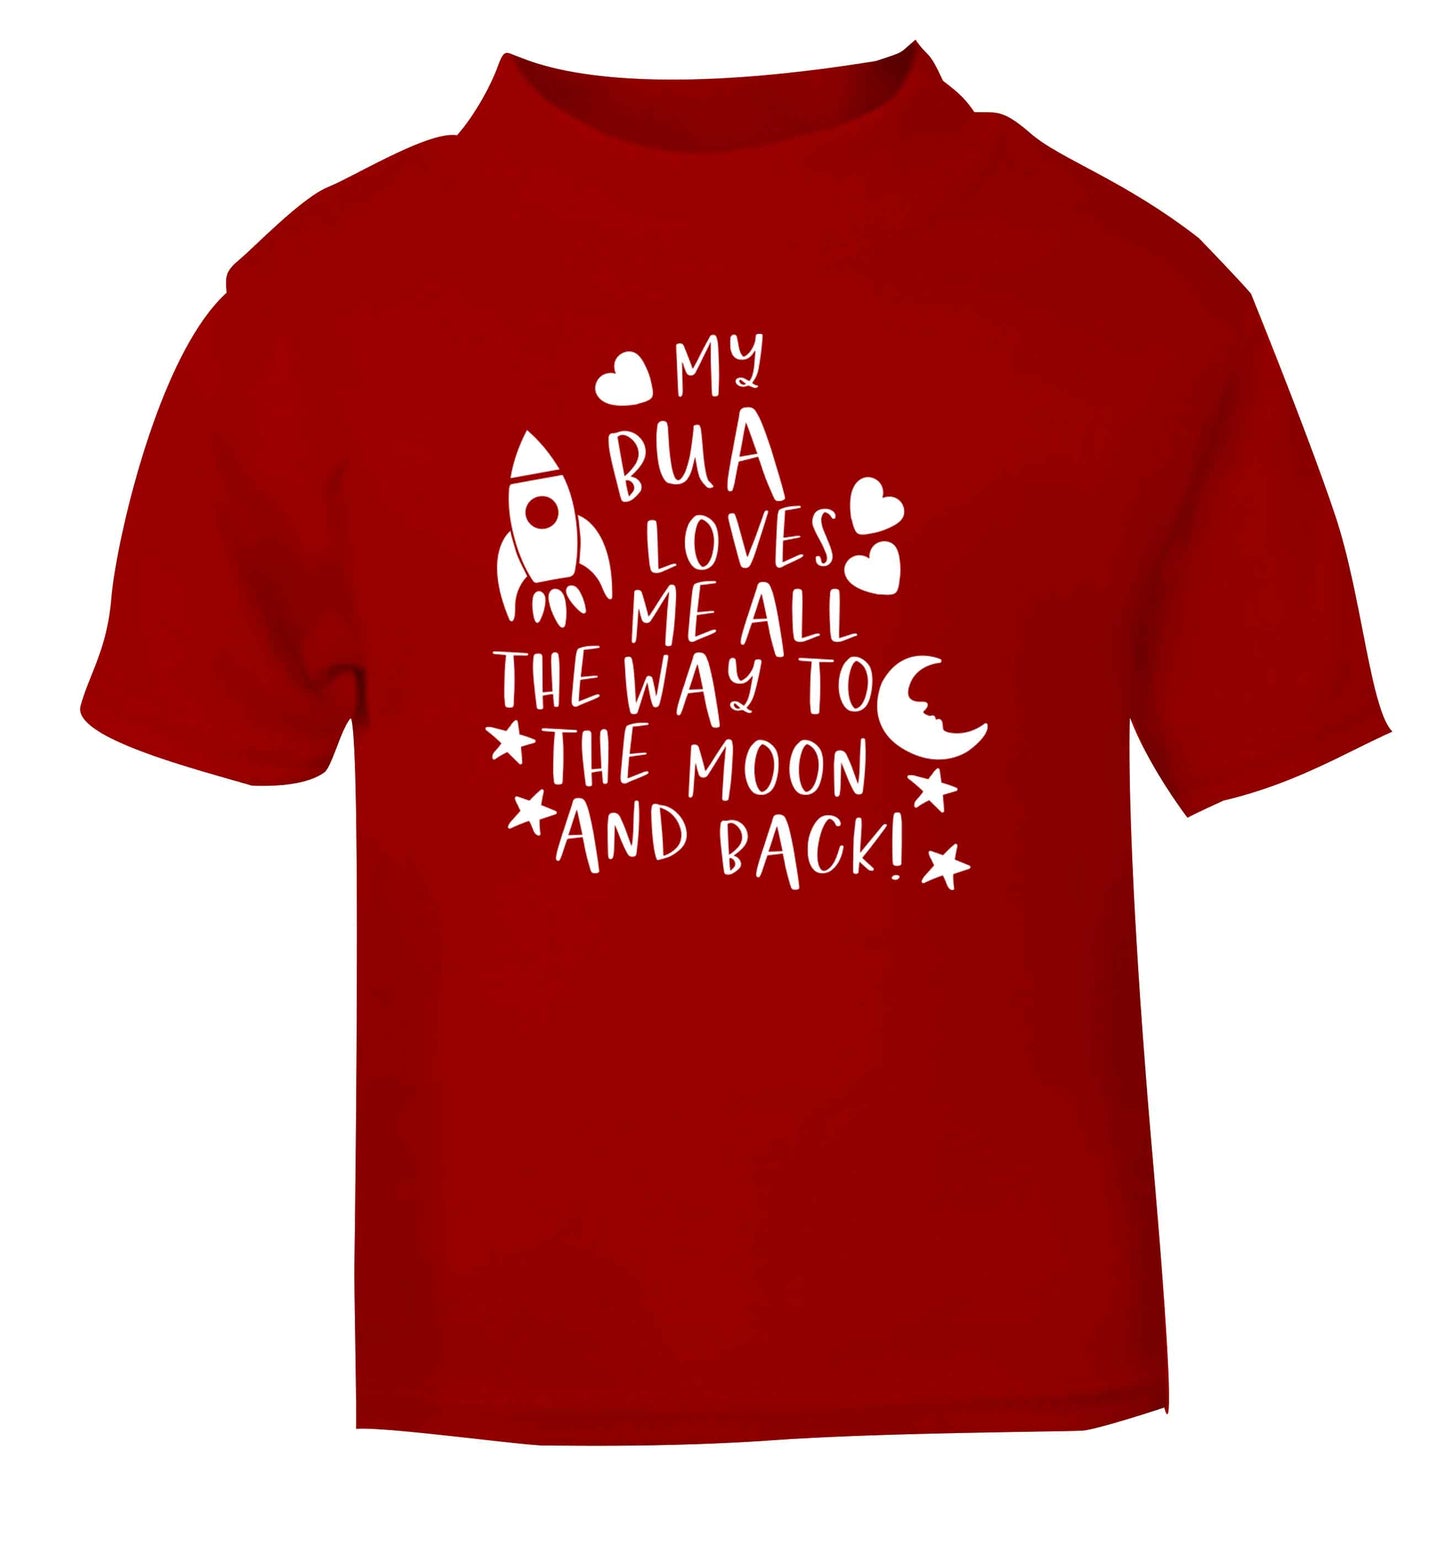 My bua loves me all they way to the moon and back red Baby Toddler Tshirt 2 Years